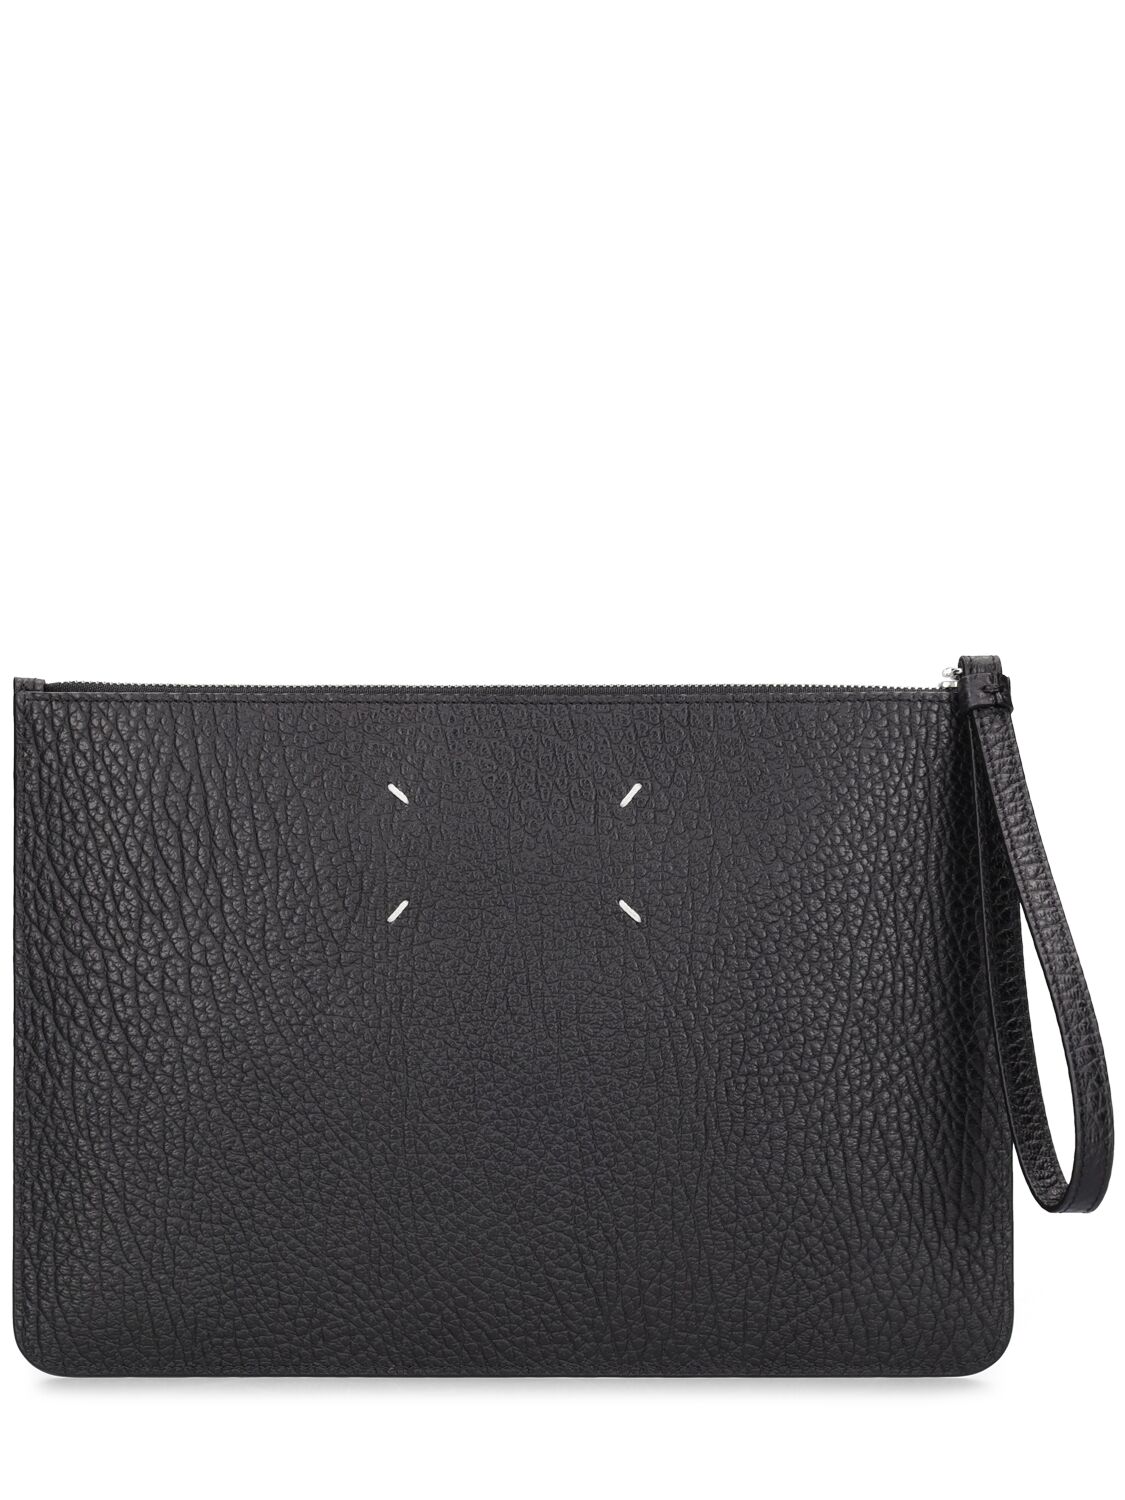 Maison Margiela Large Grained Leather Pouch In Black